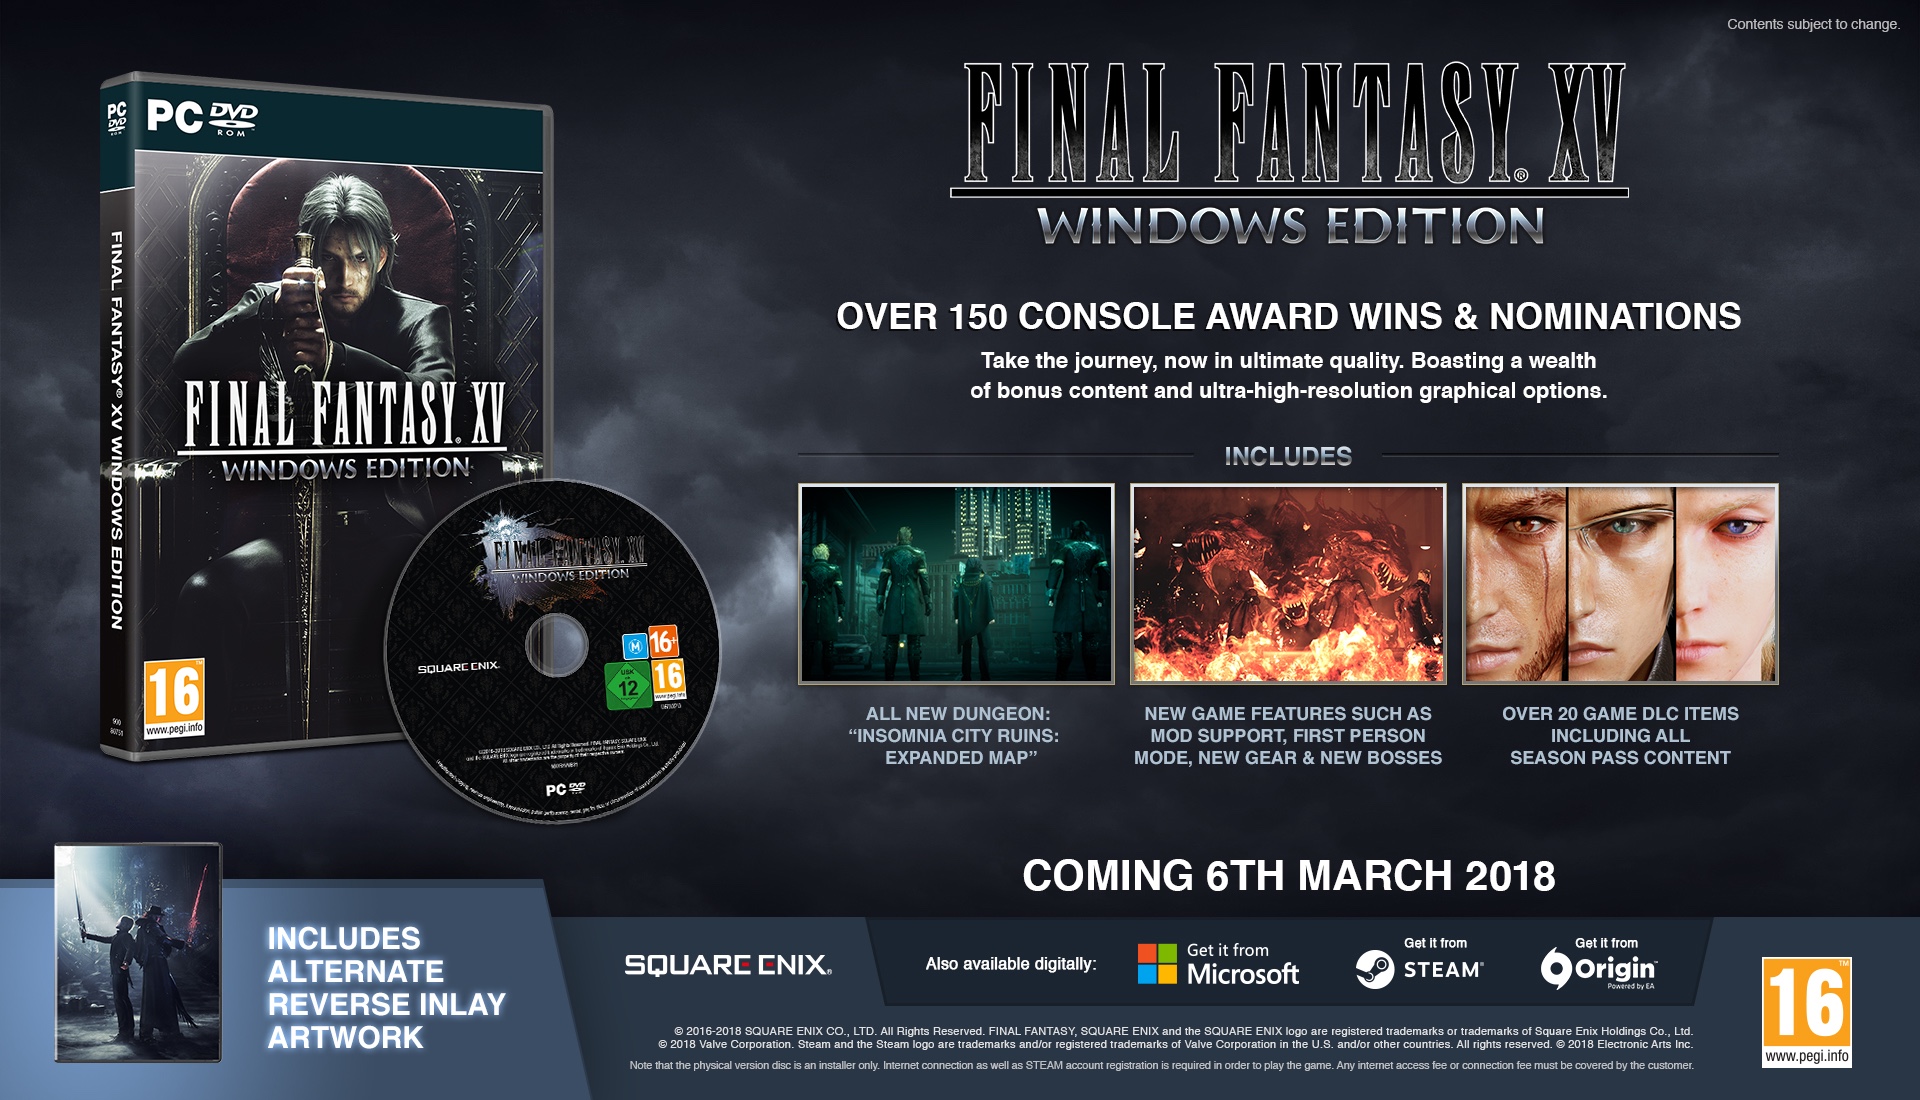 Final Fantasy Xv Windows Edition  Benchmark And Pre-Orders Now Live